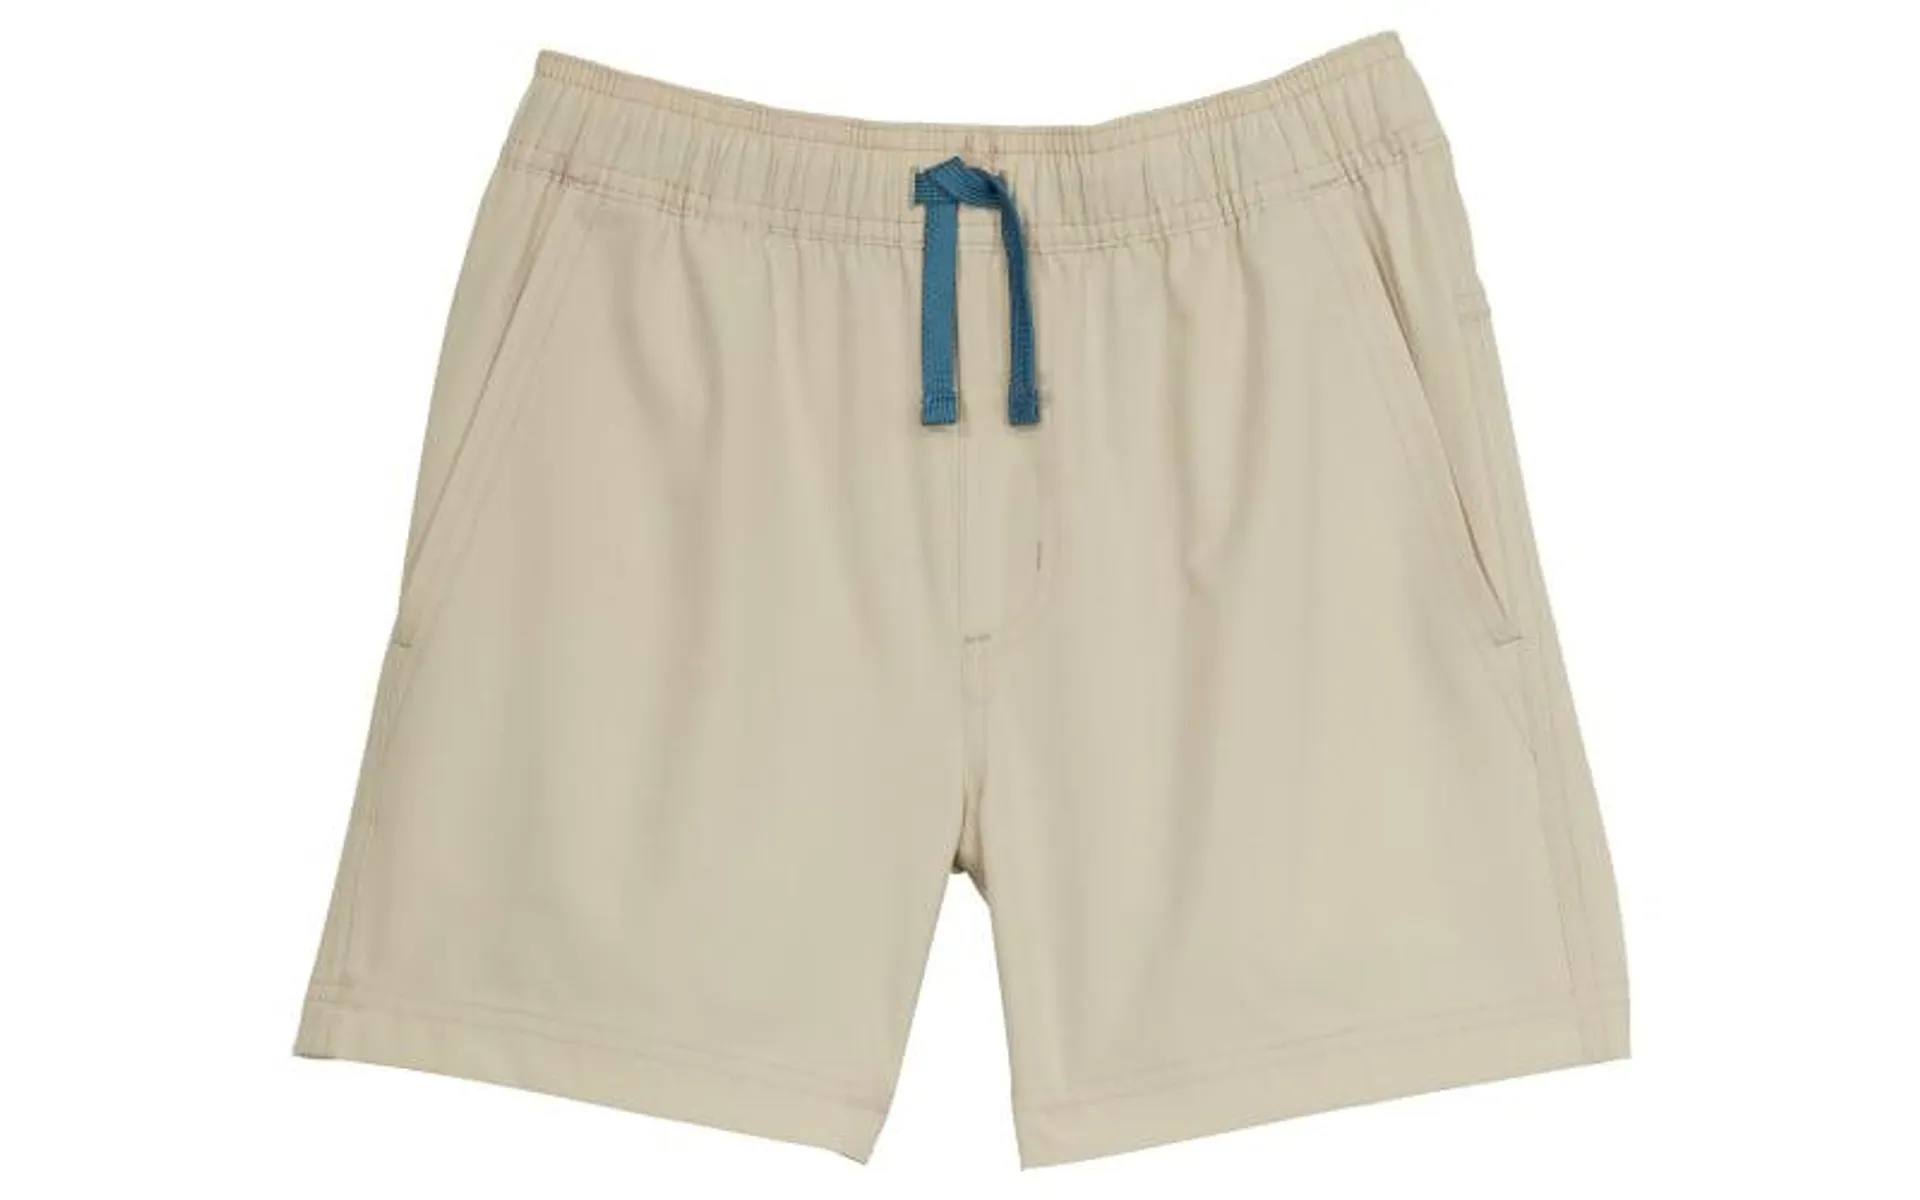 World Wide Sportsman Charter 3-Pocket Pull-On Shorts for Toddlers or Kids